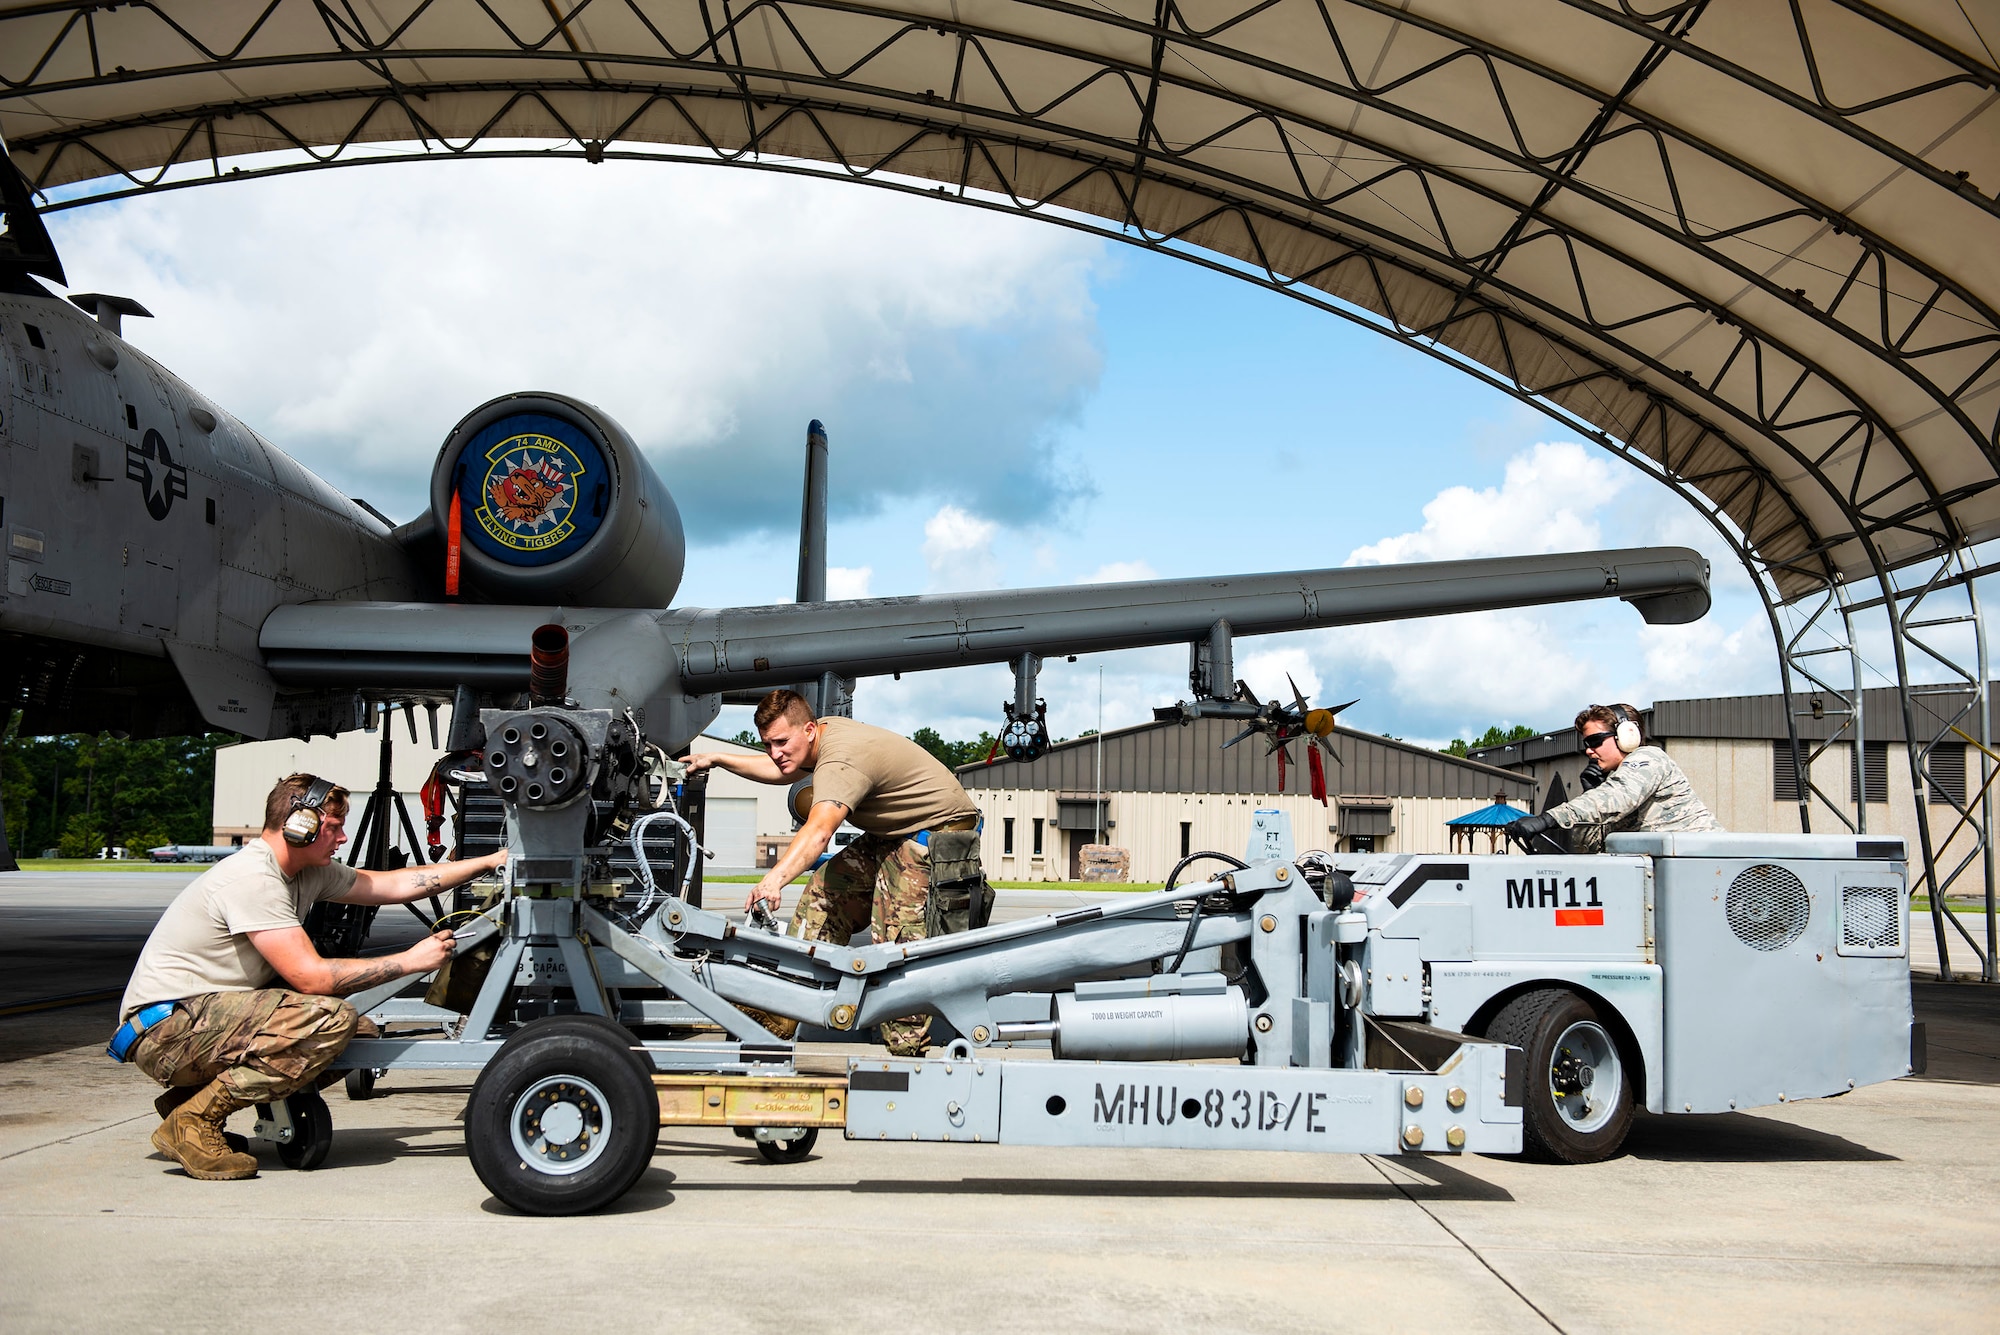 Airmen from the 74th Aircraft Maintenance Unit secure a 30mm GAU-8 Gatling Gun system during unscheduled maintenance, July 23, 2019, at Moody Air Force Base, Ga. Unscheduled maintenance occurs when discrepancies are discovered with A-10C Thunderbolt II weapon systems. These repairs aid in reducing down time of the aircraft and supporting sustained operations tempo. (U.S. Air Force photo by Senior Airman Erick Requadt)